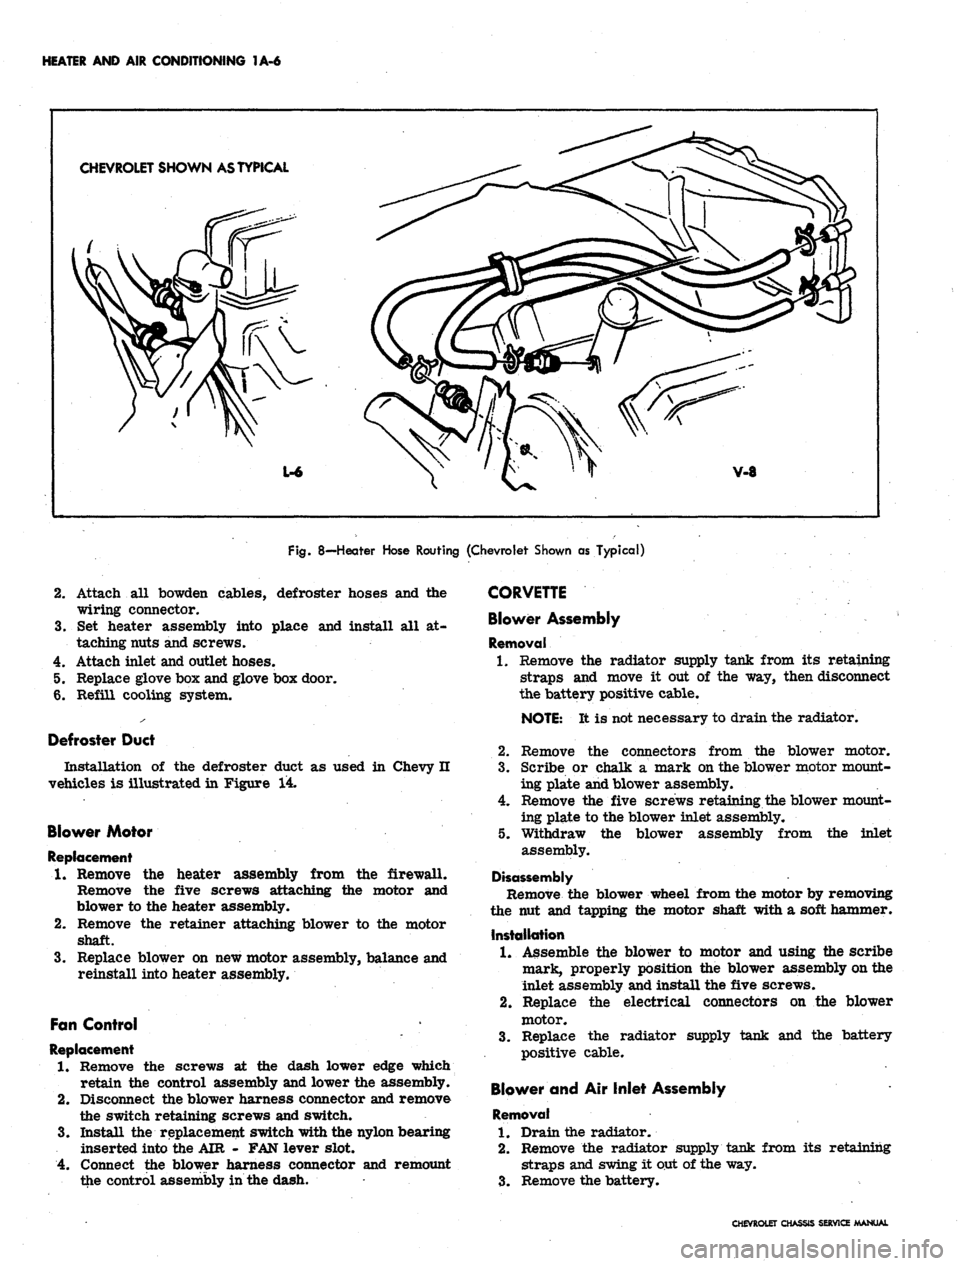 CHEVROLET CAMARO 1967 1.G Chassis Workshop Manual 
HEATER AND AIR CONDITIONING 1A-6

CHEVROLET SHOWN AS TYPICAL

Fig.
 8—Heater Hose Routing (Chevrolet Shown as Typical)

cables, defroster hoses and the

place and install all at-

4.

5.

6. 
Attac